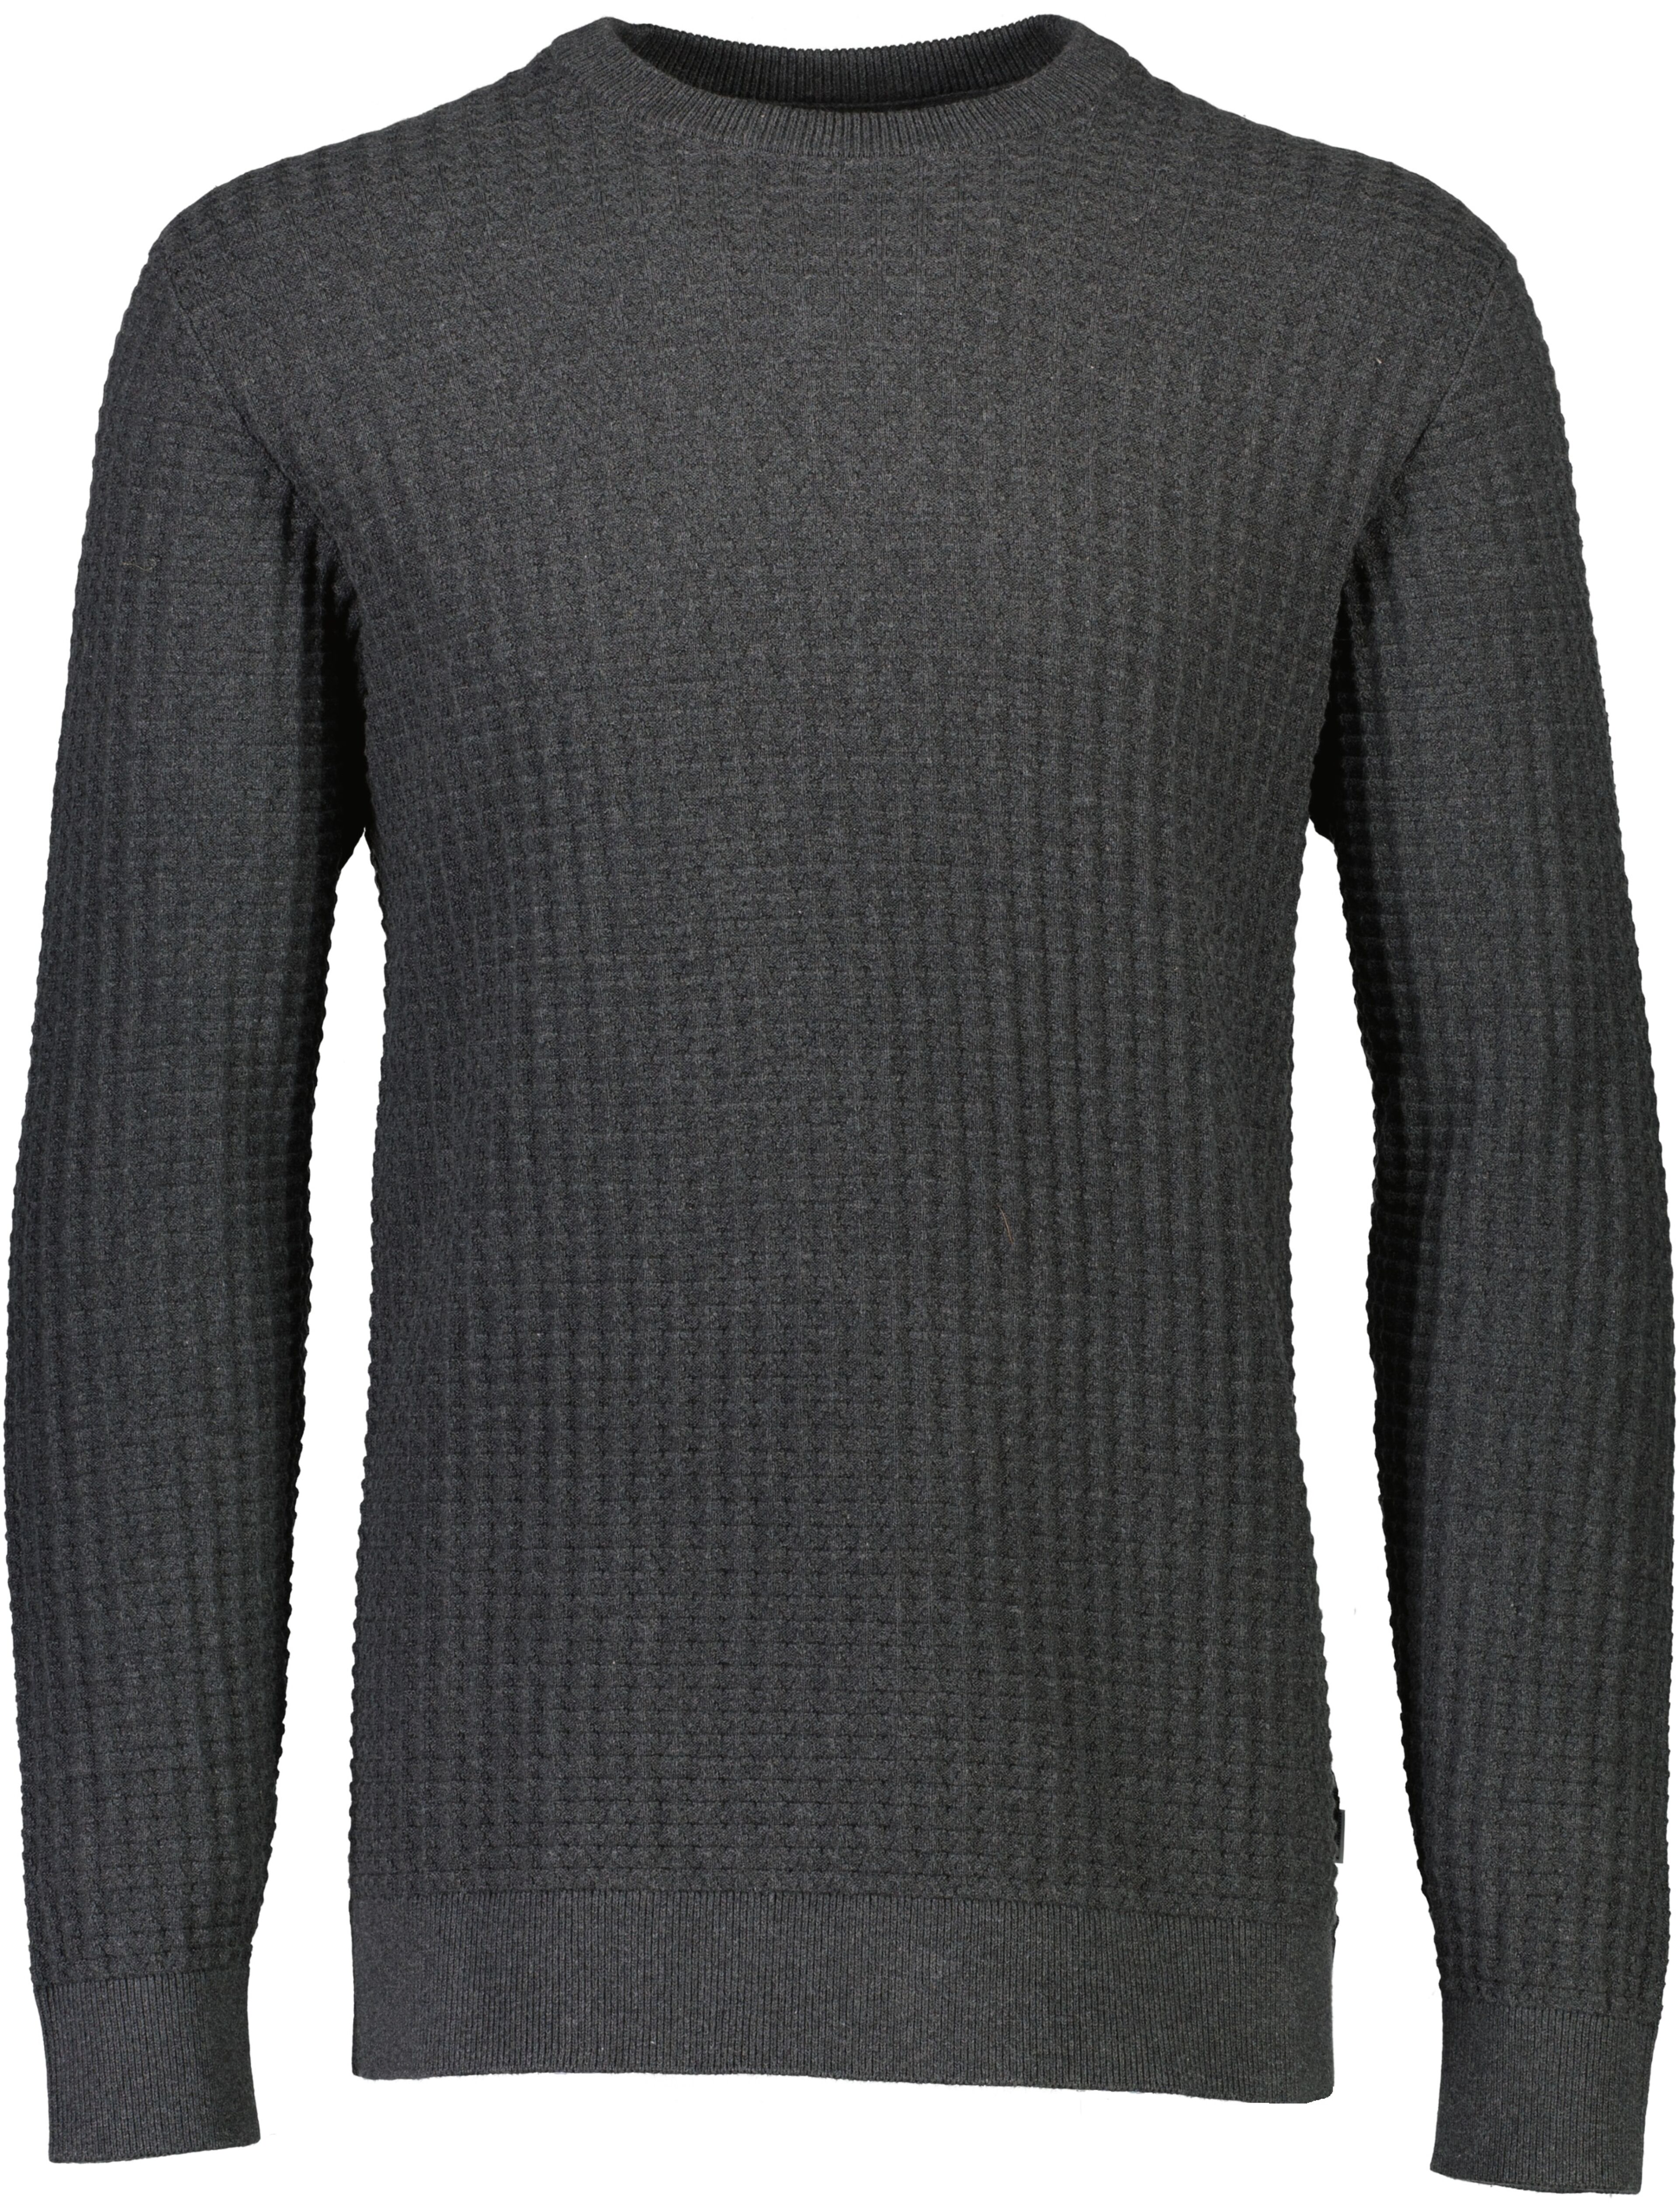 Knitwear | Relaxed fit 30-800200A